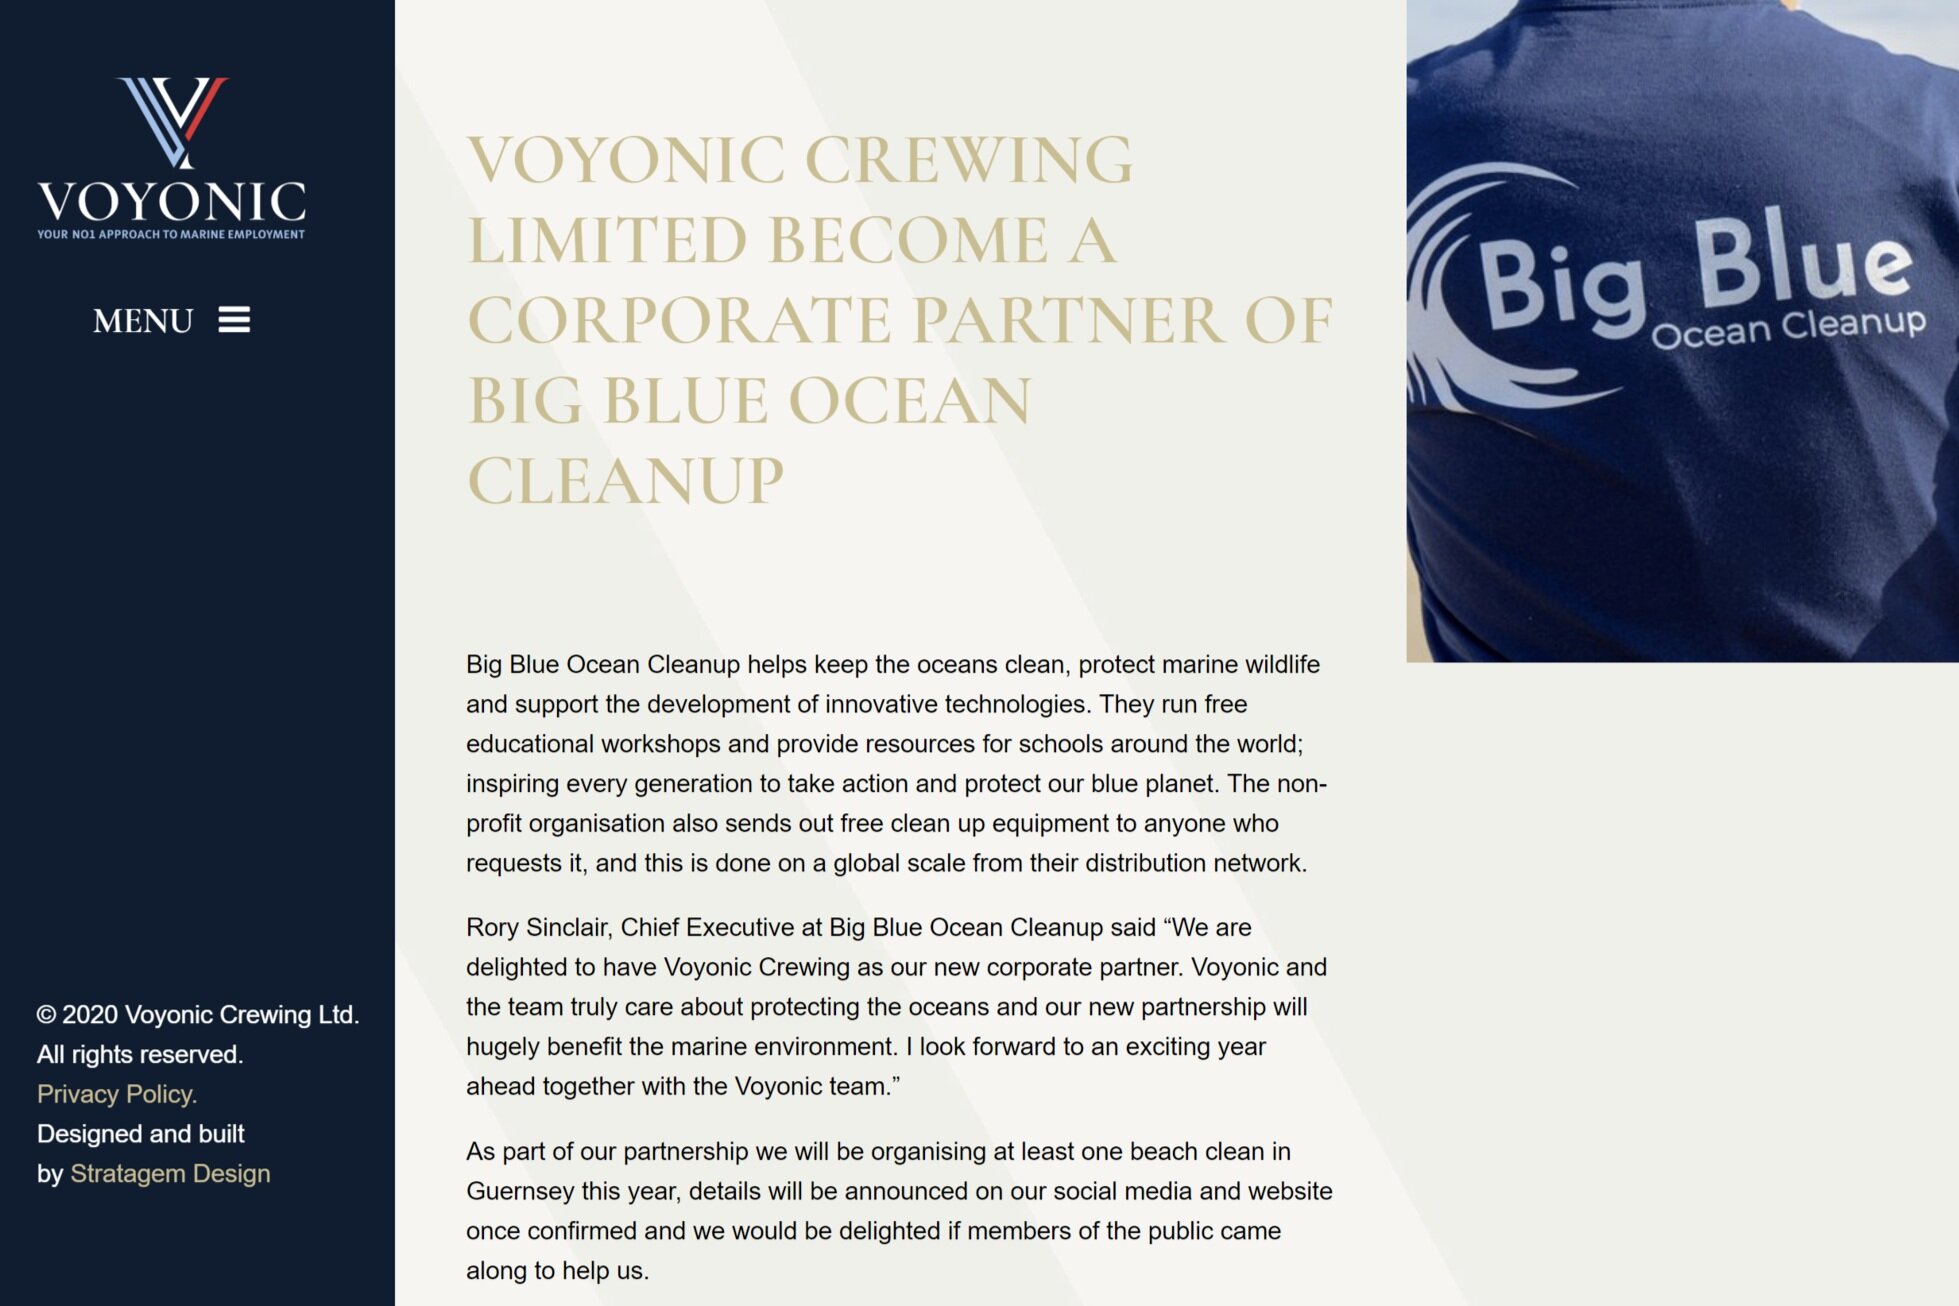 Ride+on+Retreats+supporting+the+Big+Blue+Ocean+Cleanup%21+%E2%80%94+Ride+on+Retreats+-+Google+Chrome+03_05_2020+15_36_39.jpg